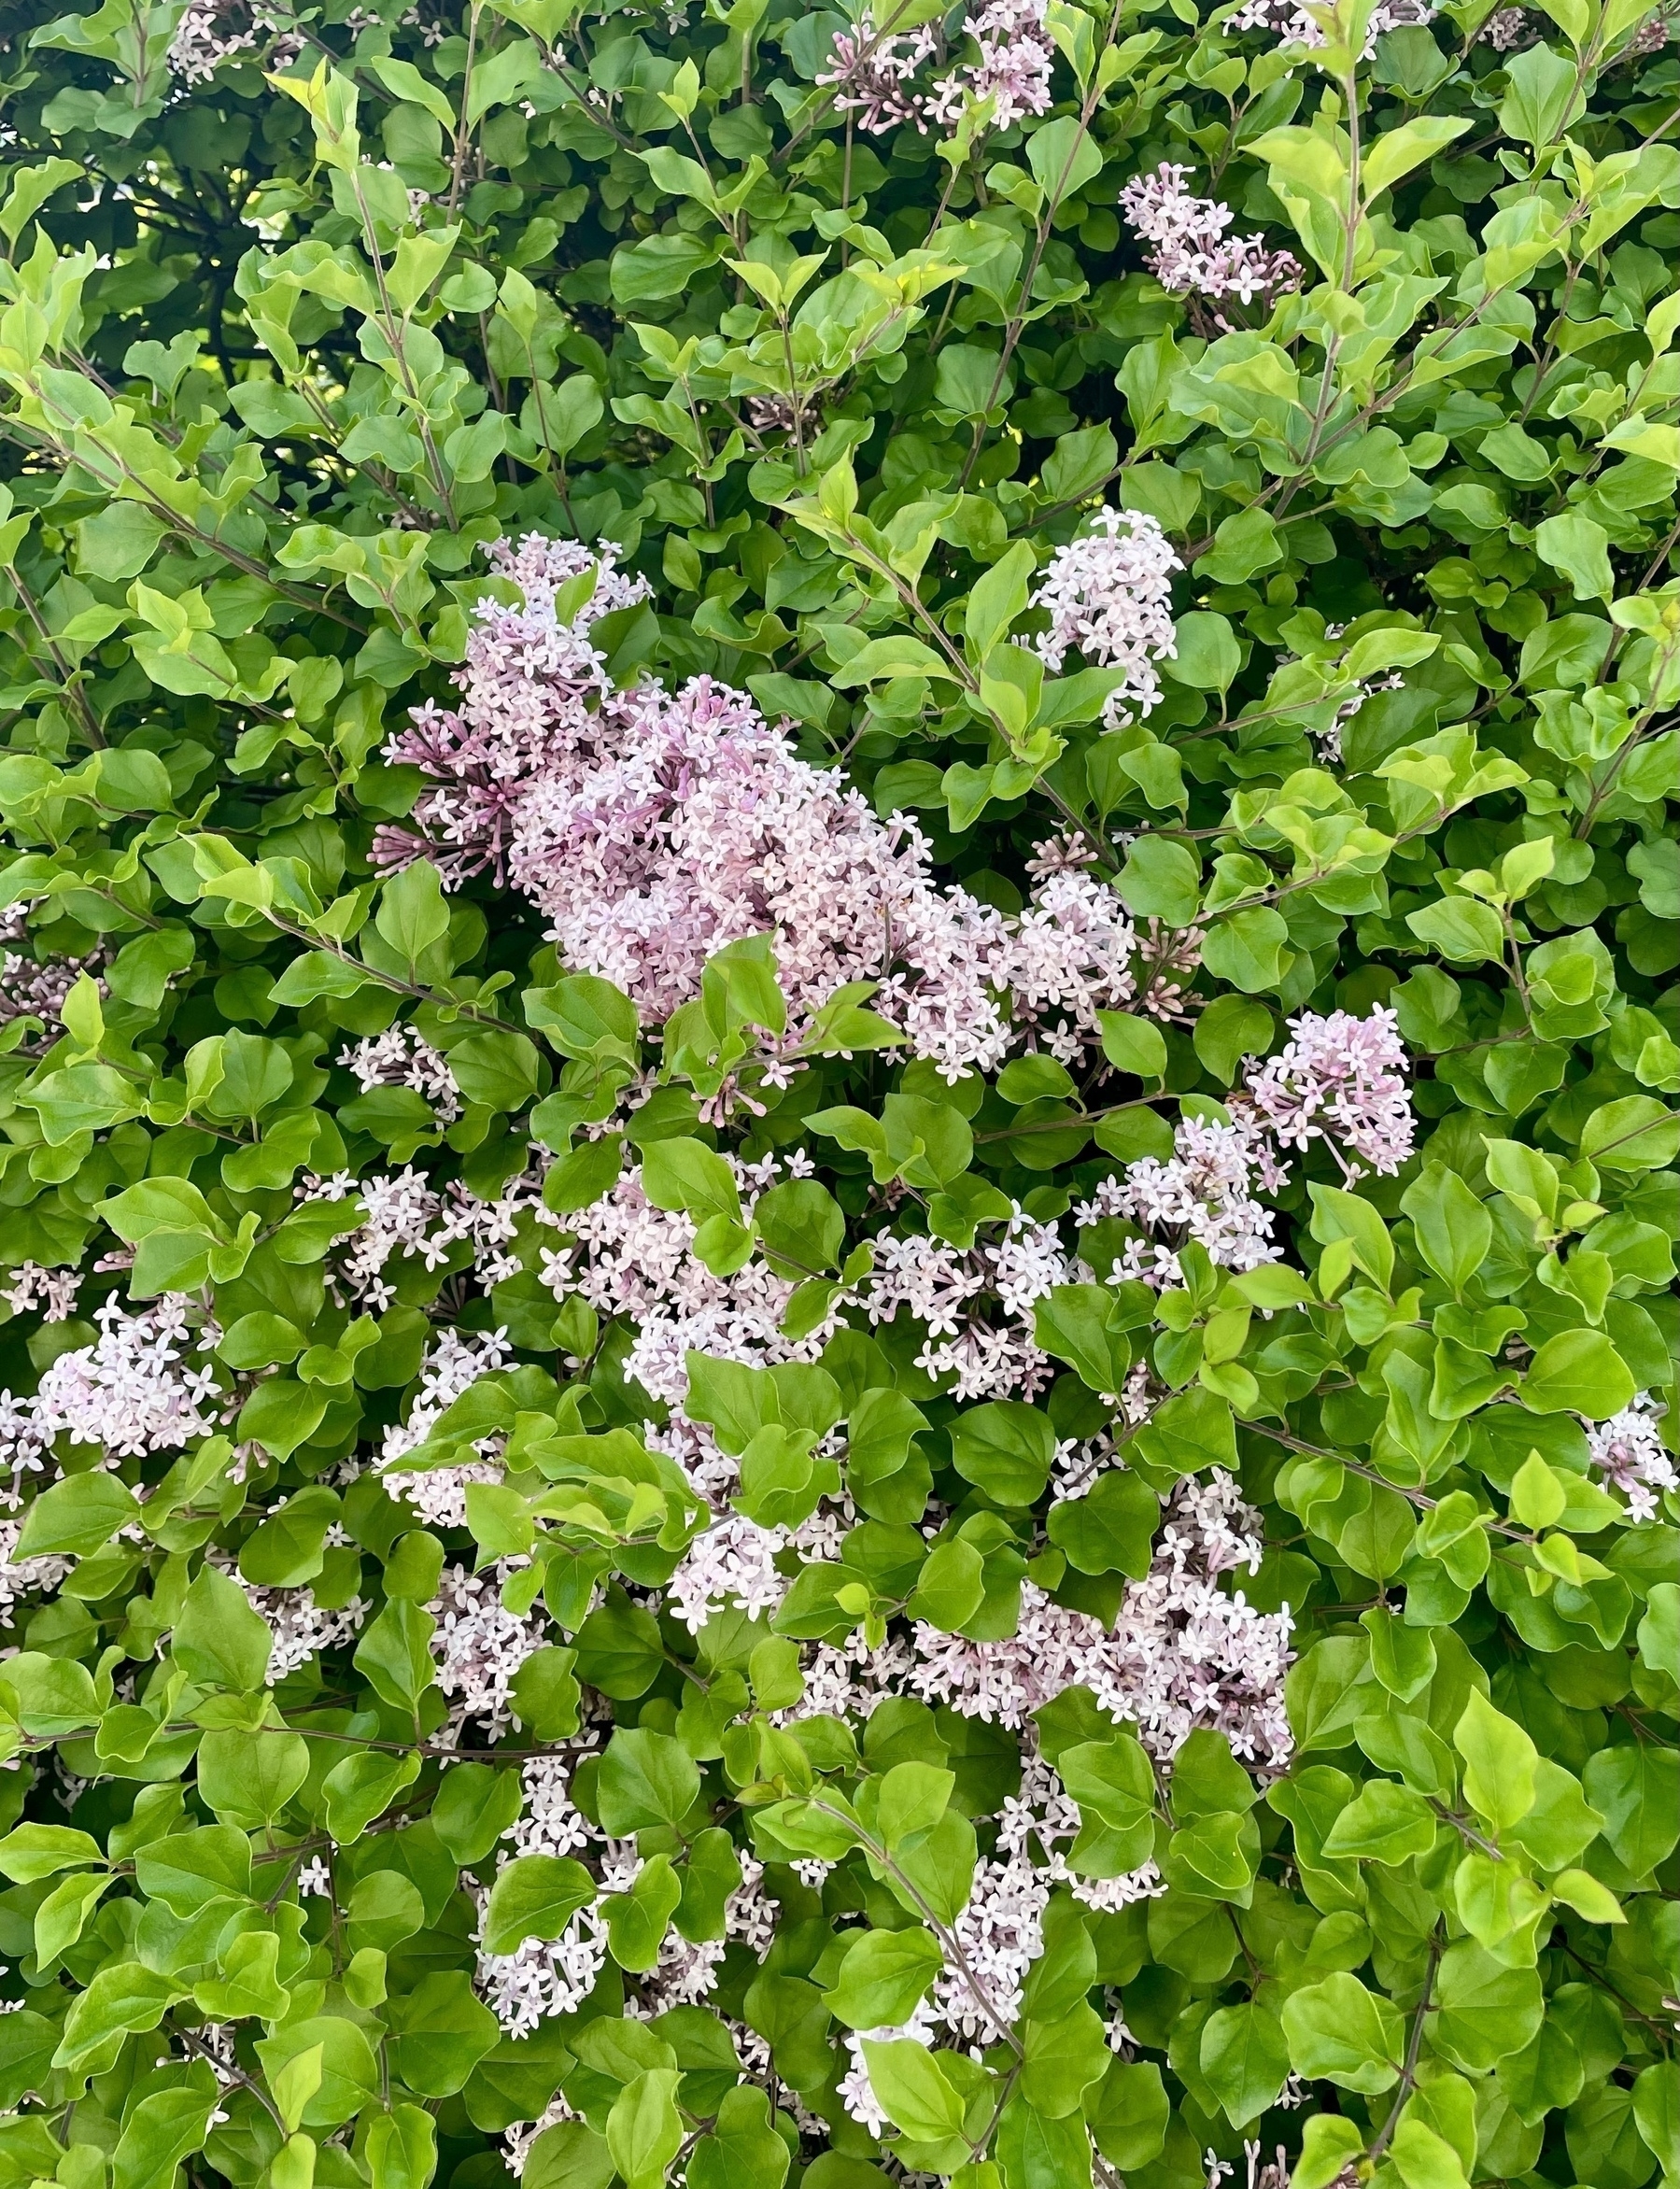 Bunches of small light purple lilac flowers peeking out from a thick bush of green leaves. 